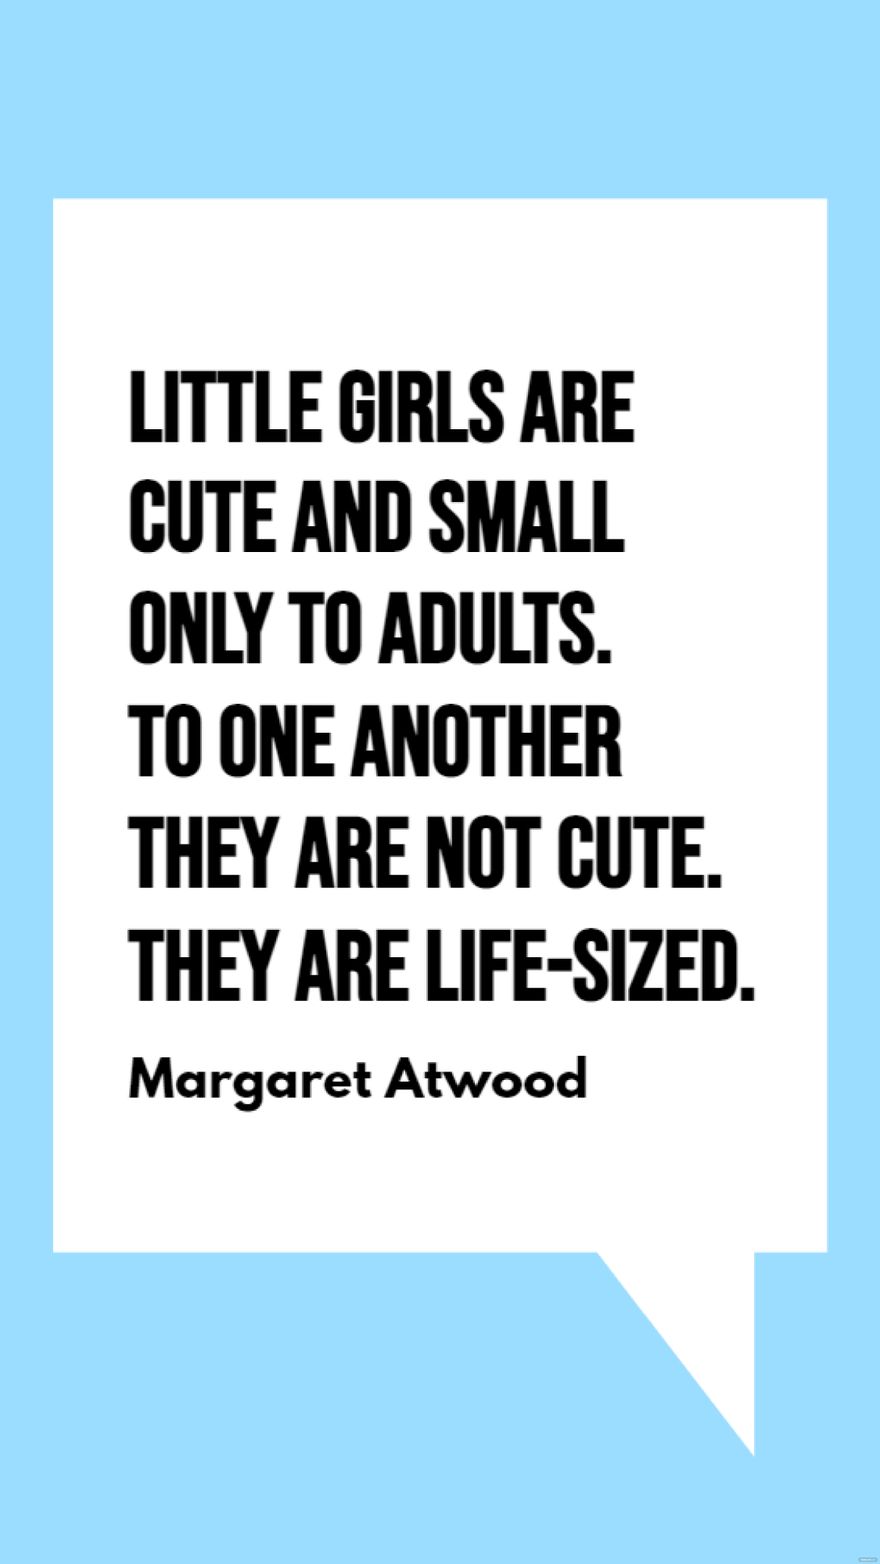 Margaret Atwood - Little girls are cute and small only to adults. To one another they are not cute. They are life-sized.